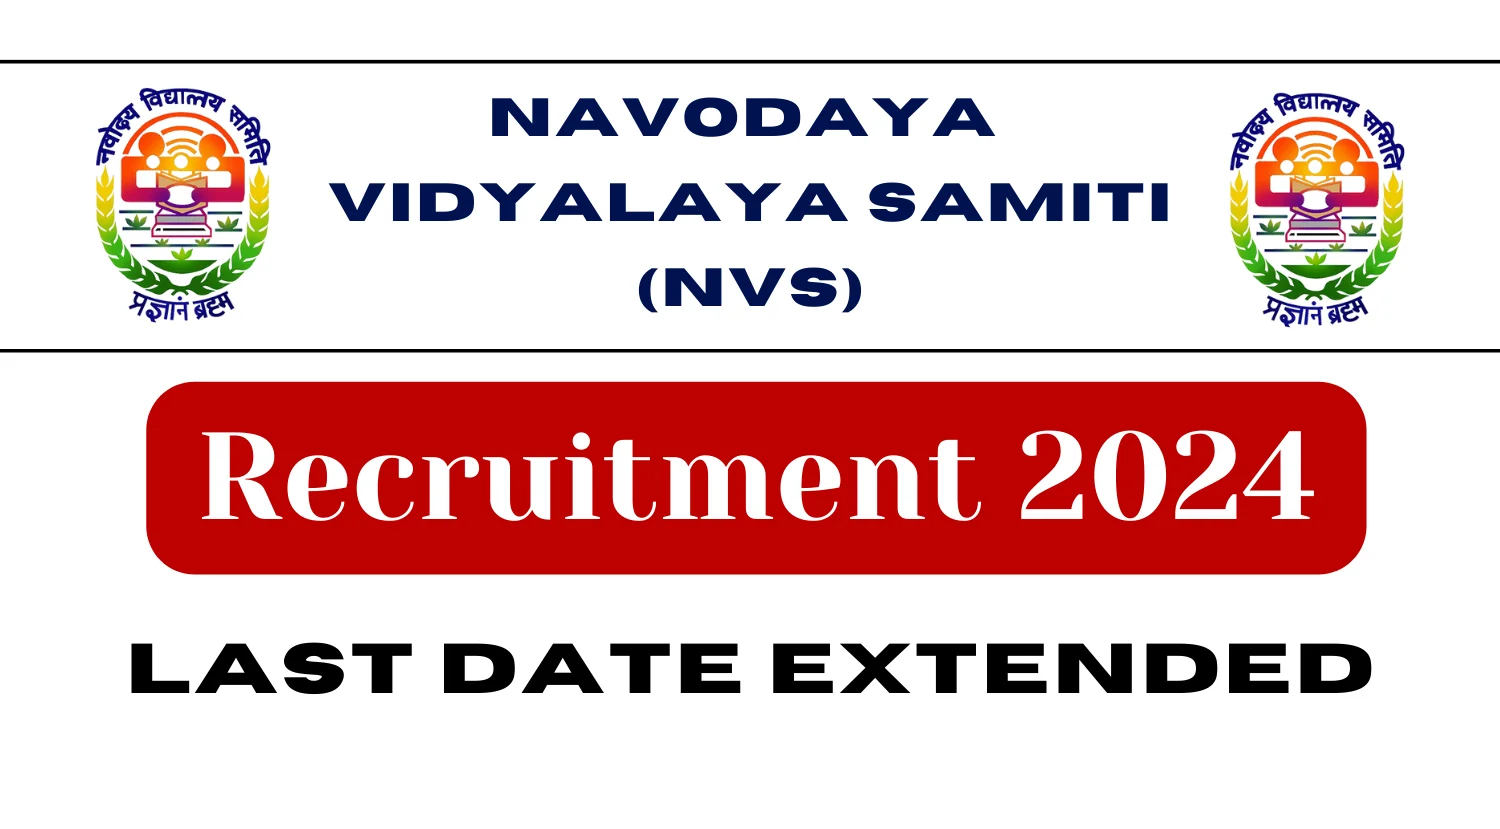 NVS 1377 Vacancy Recruitment 2024 Last Date Extended up to 14th May